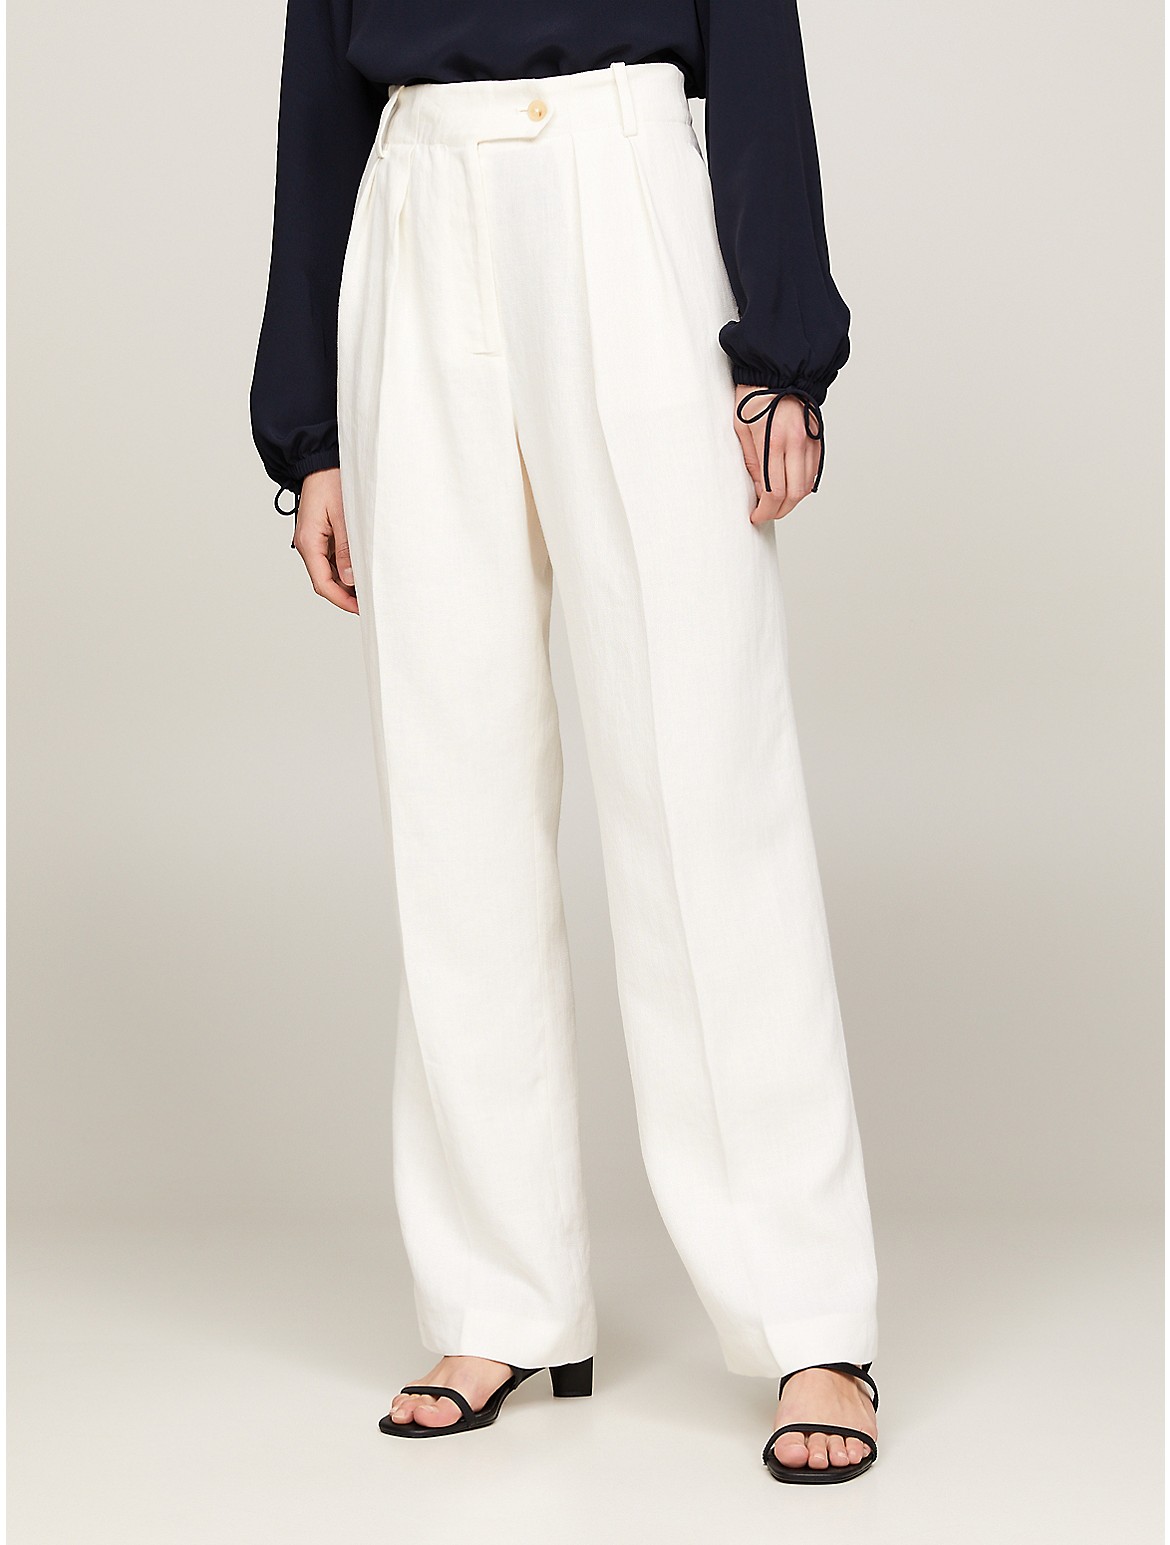 Tommy Hilfiger Women's Relaxed Straight-Fit Linen Blend Pant